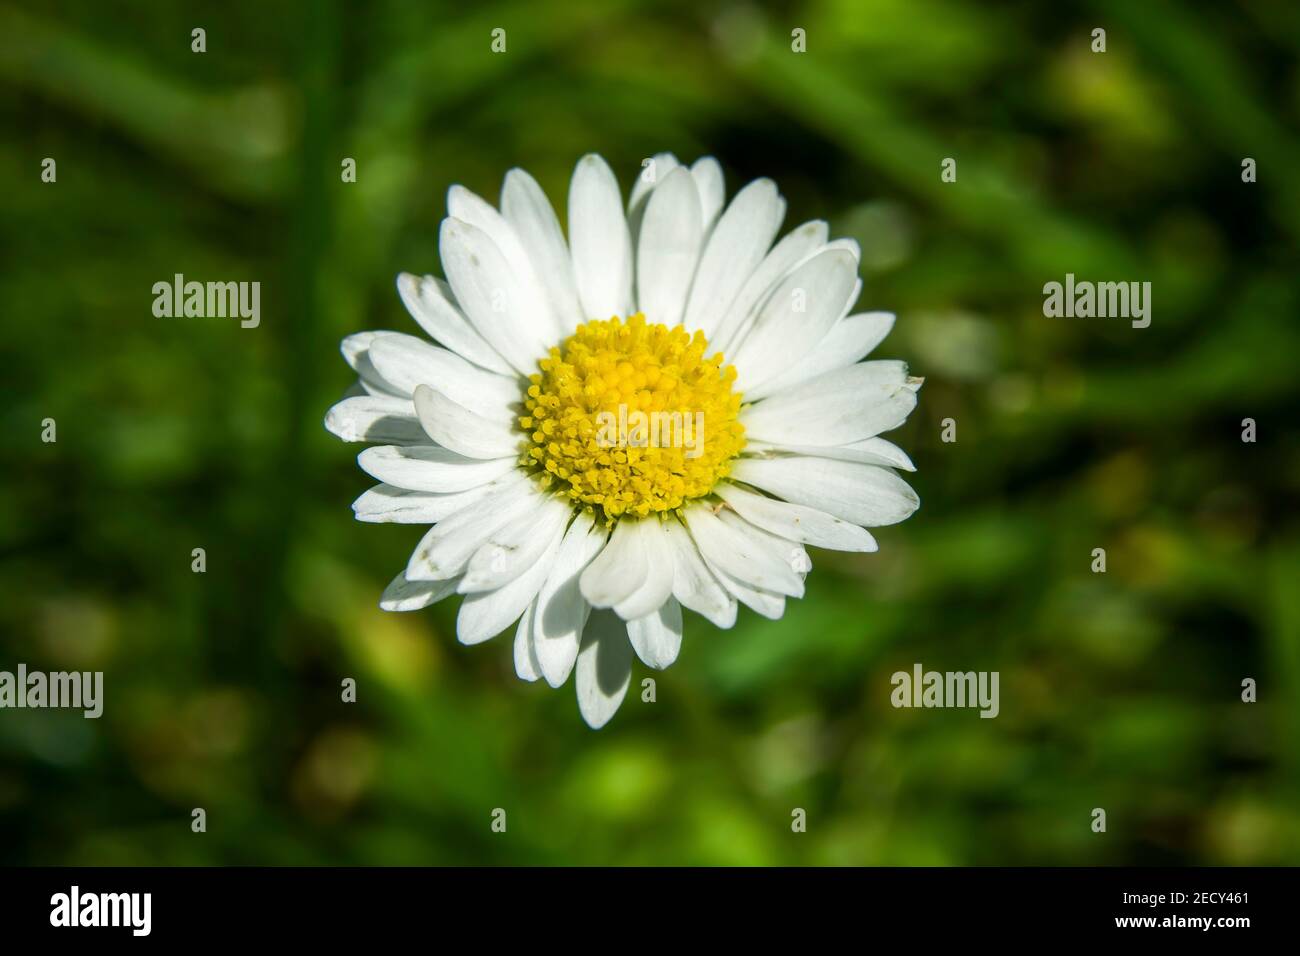 One white daisy flower on a green background, top view Stock Photo